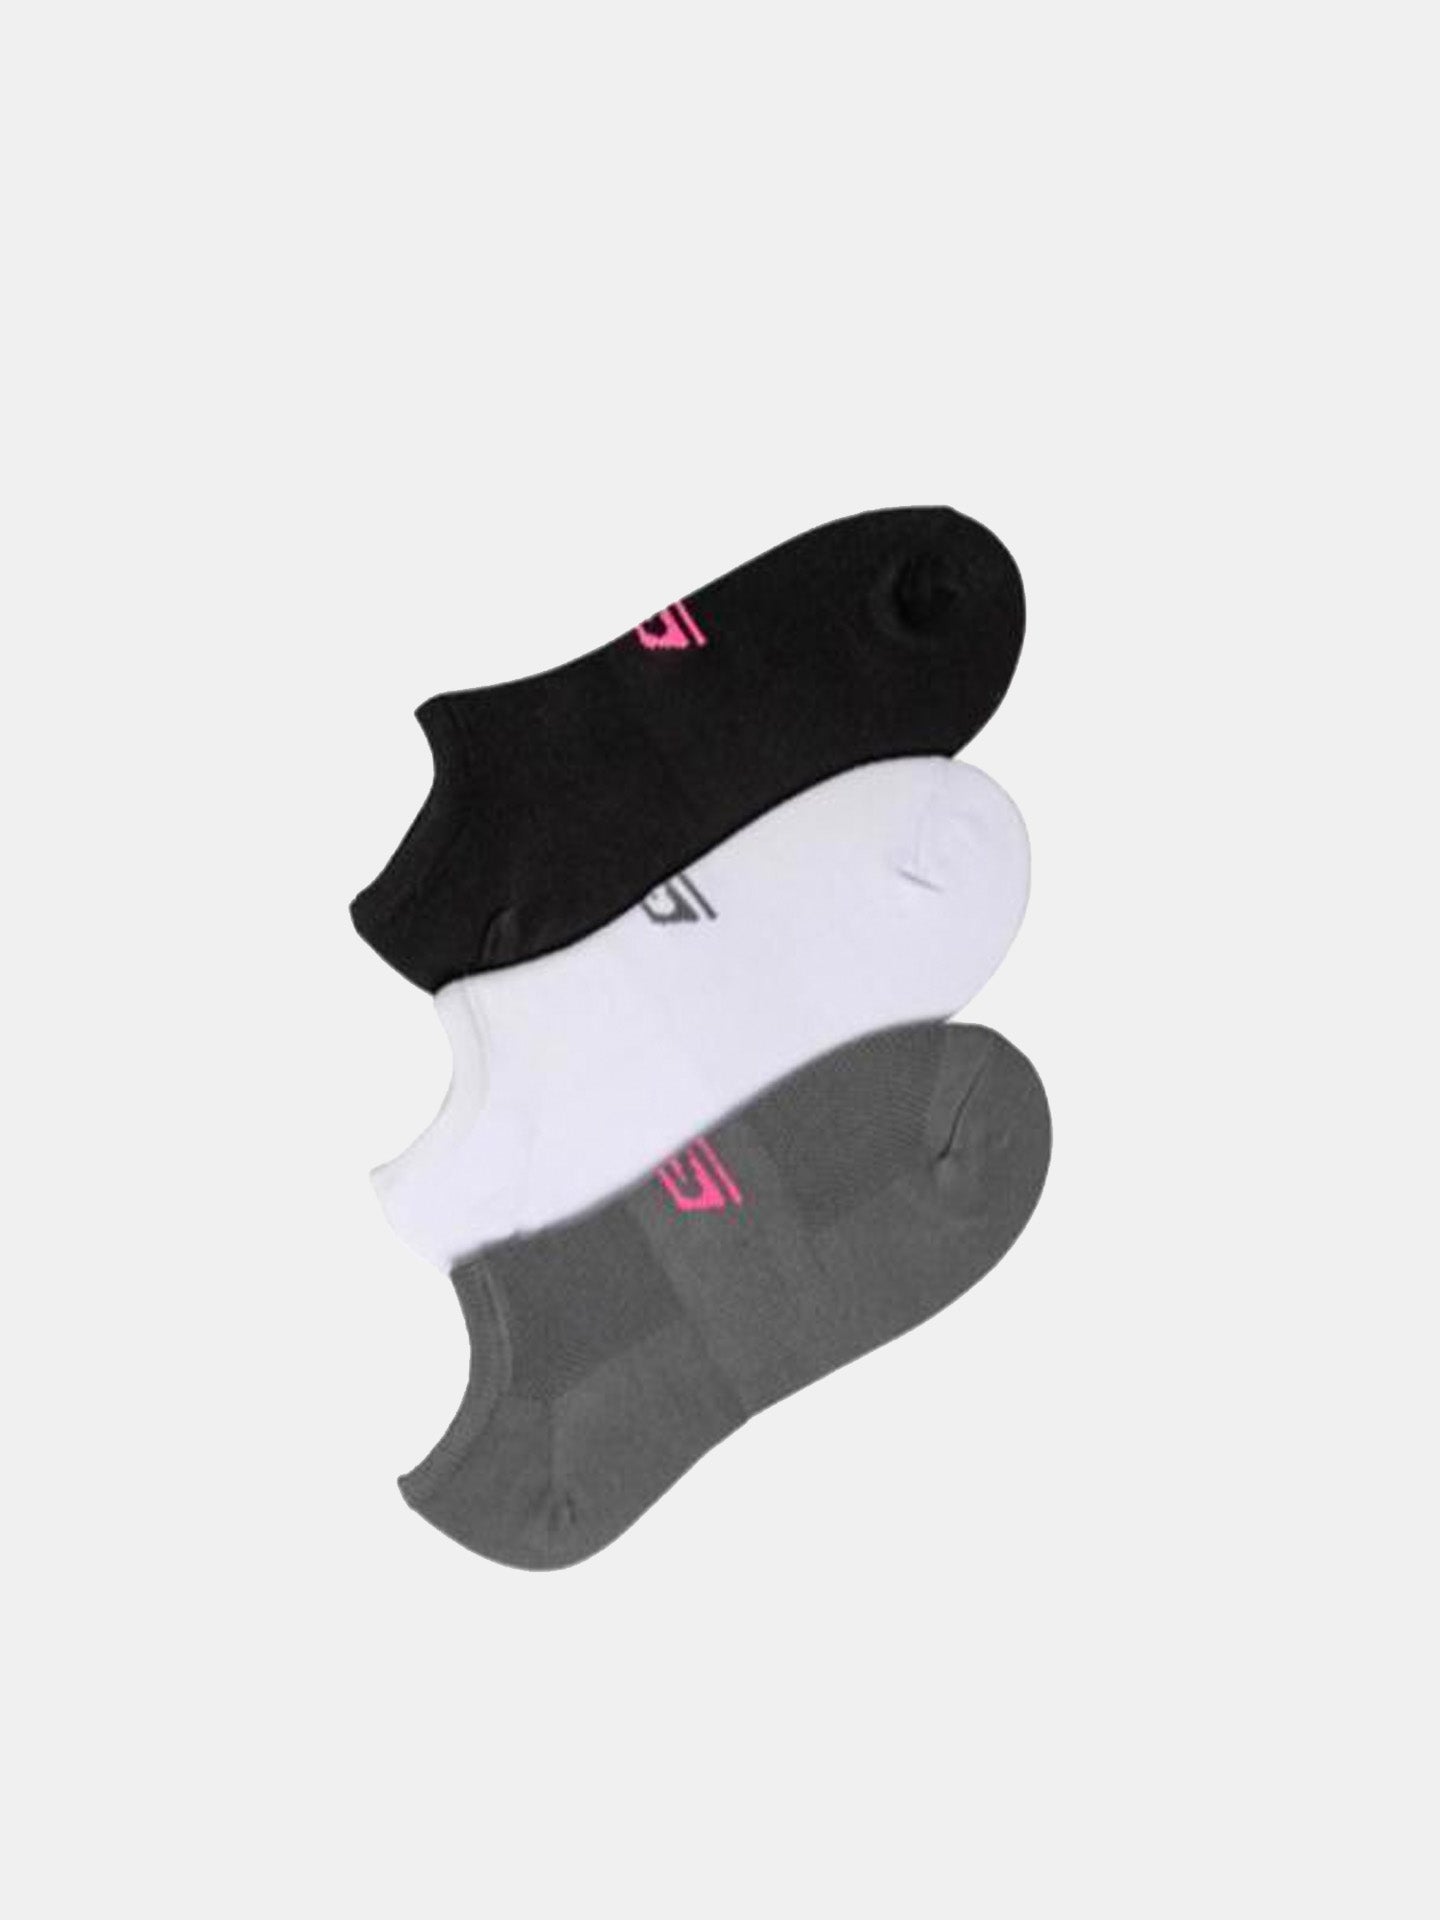 Skechers Women's 3 Pack Microfiber Non Terry No Show Ankle Socks